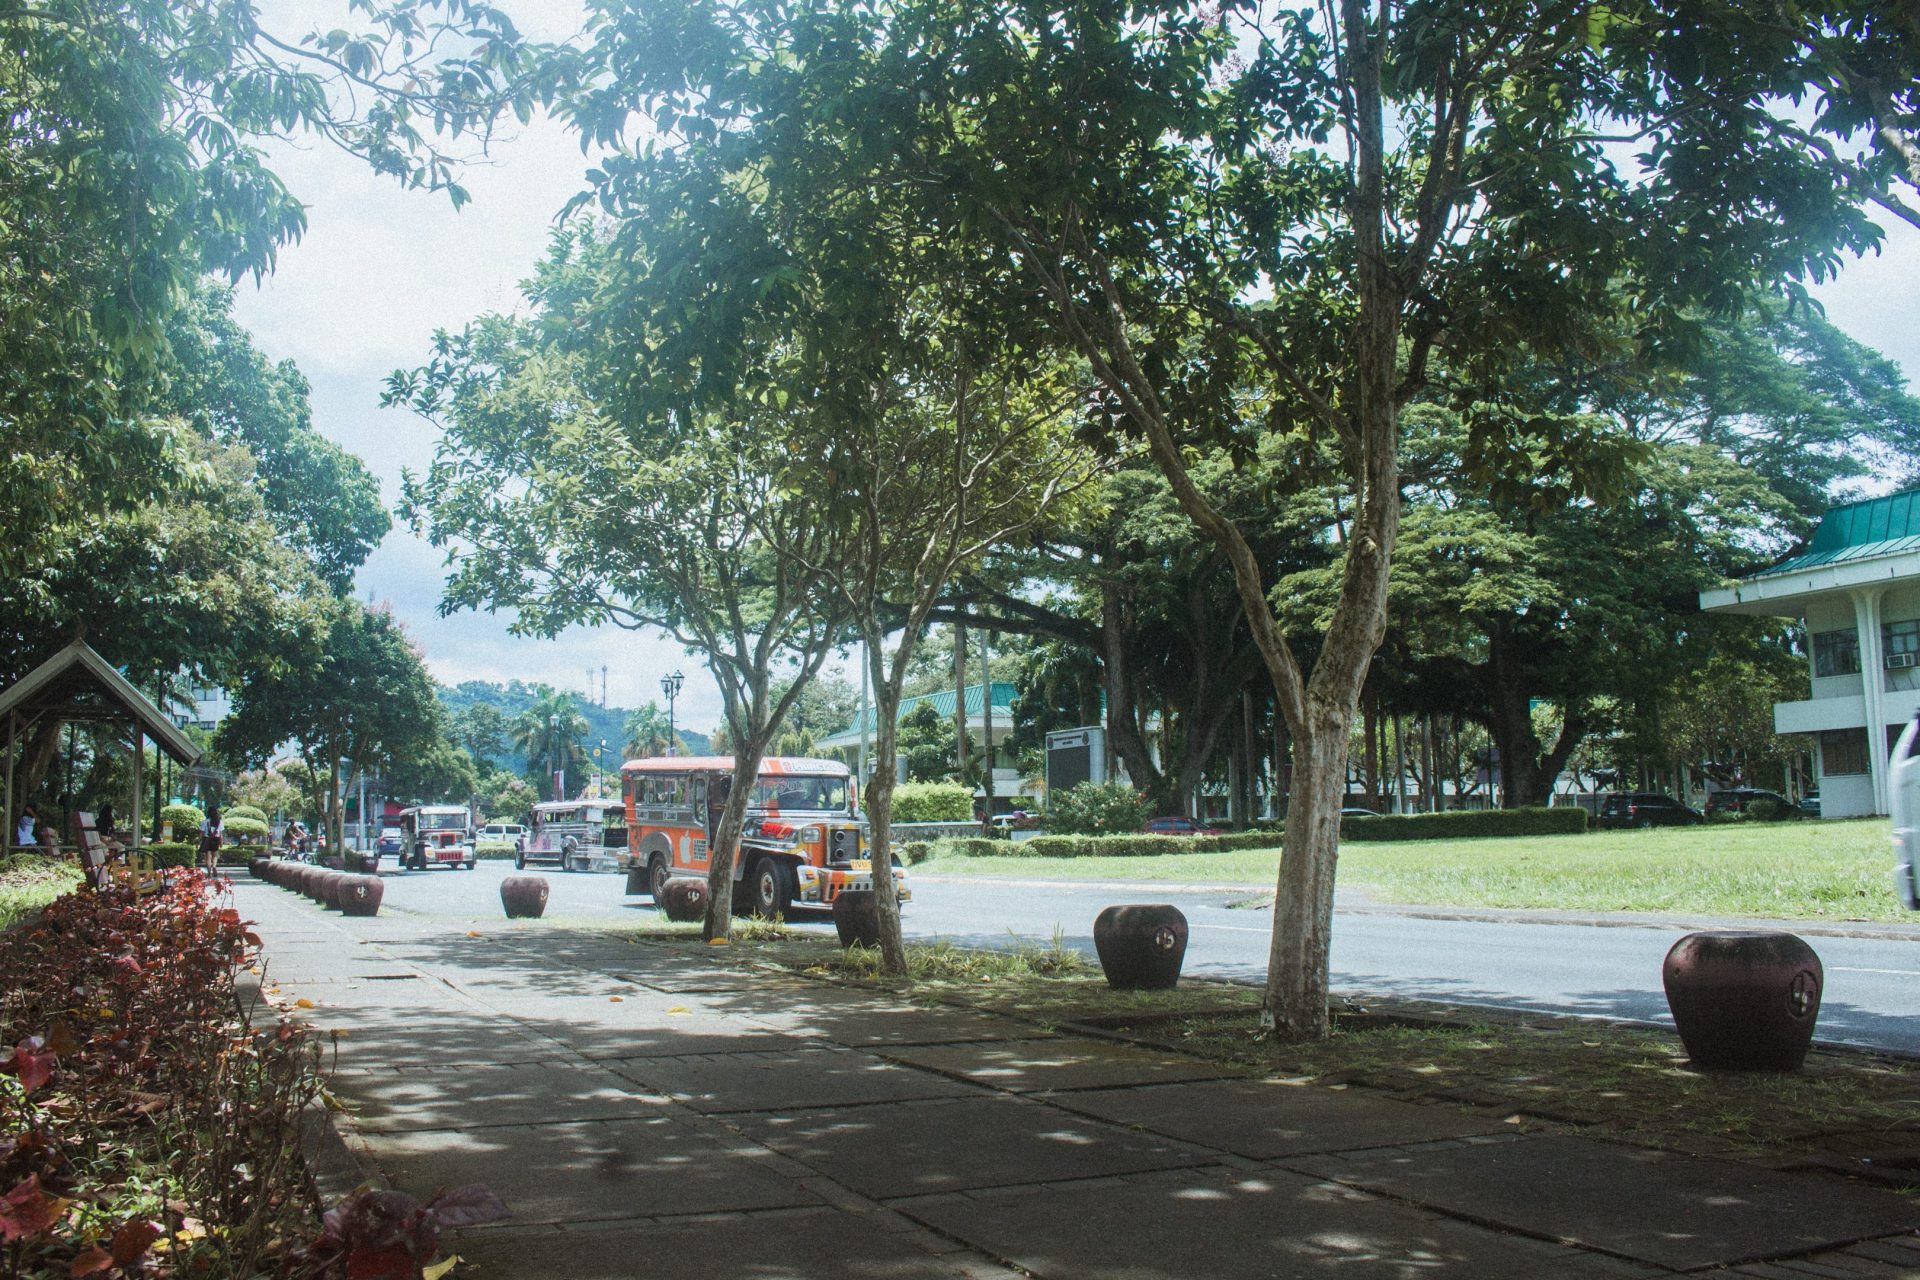 Photo of a road with jeepney